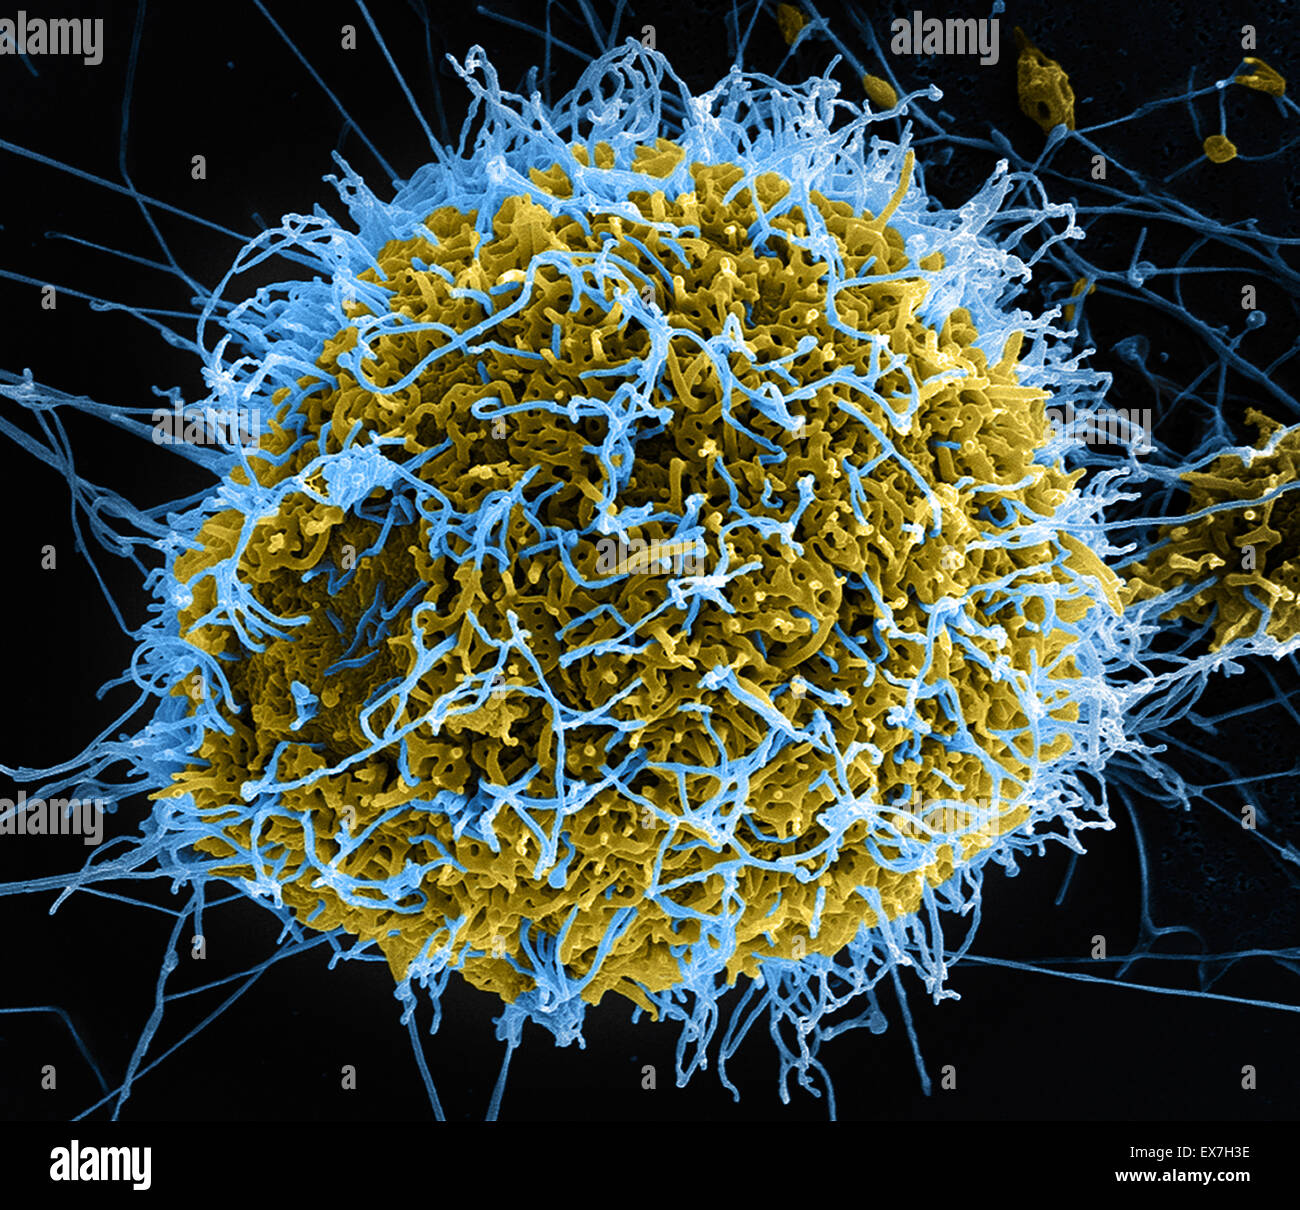 Filamentous Ebola virus particles (colored blue) budding from a chronically-infected VERO E6 cell Stock Photo